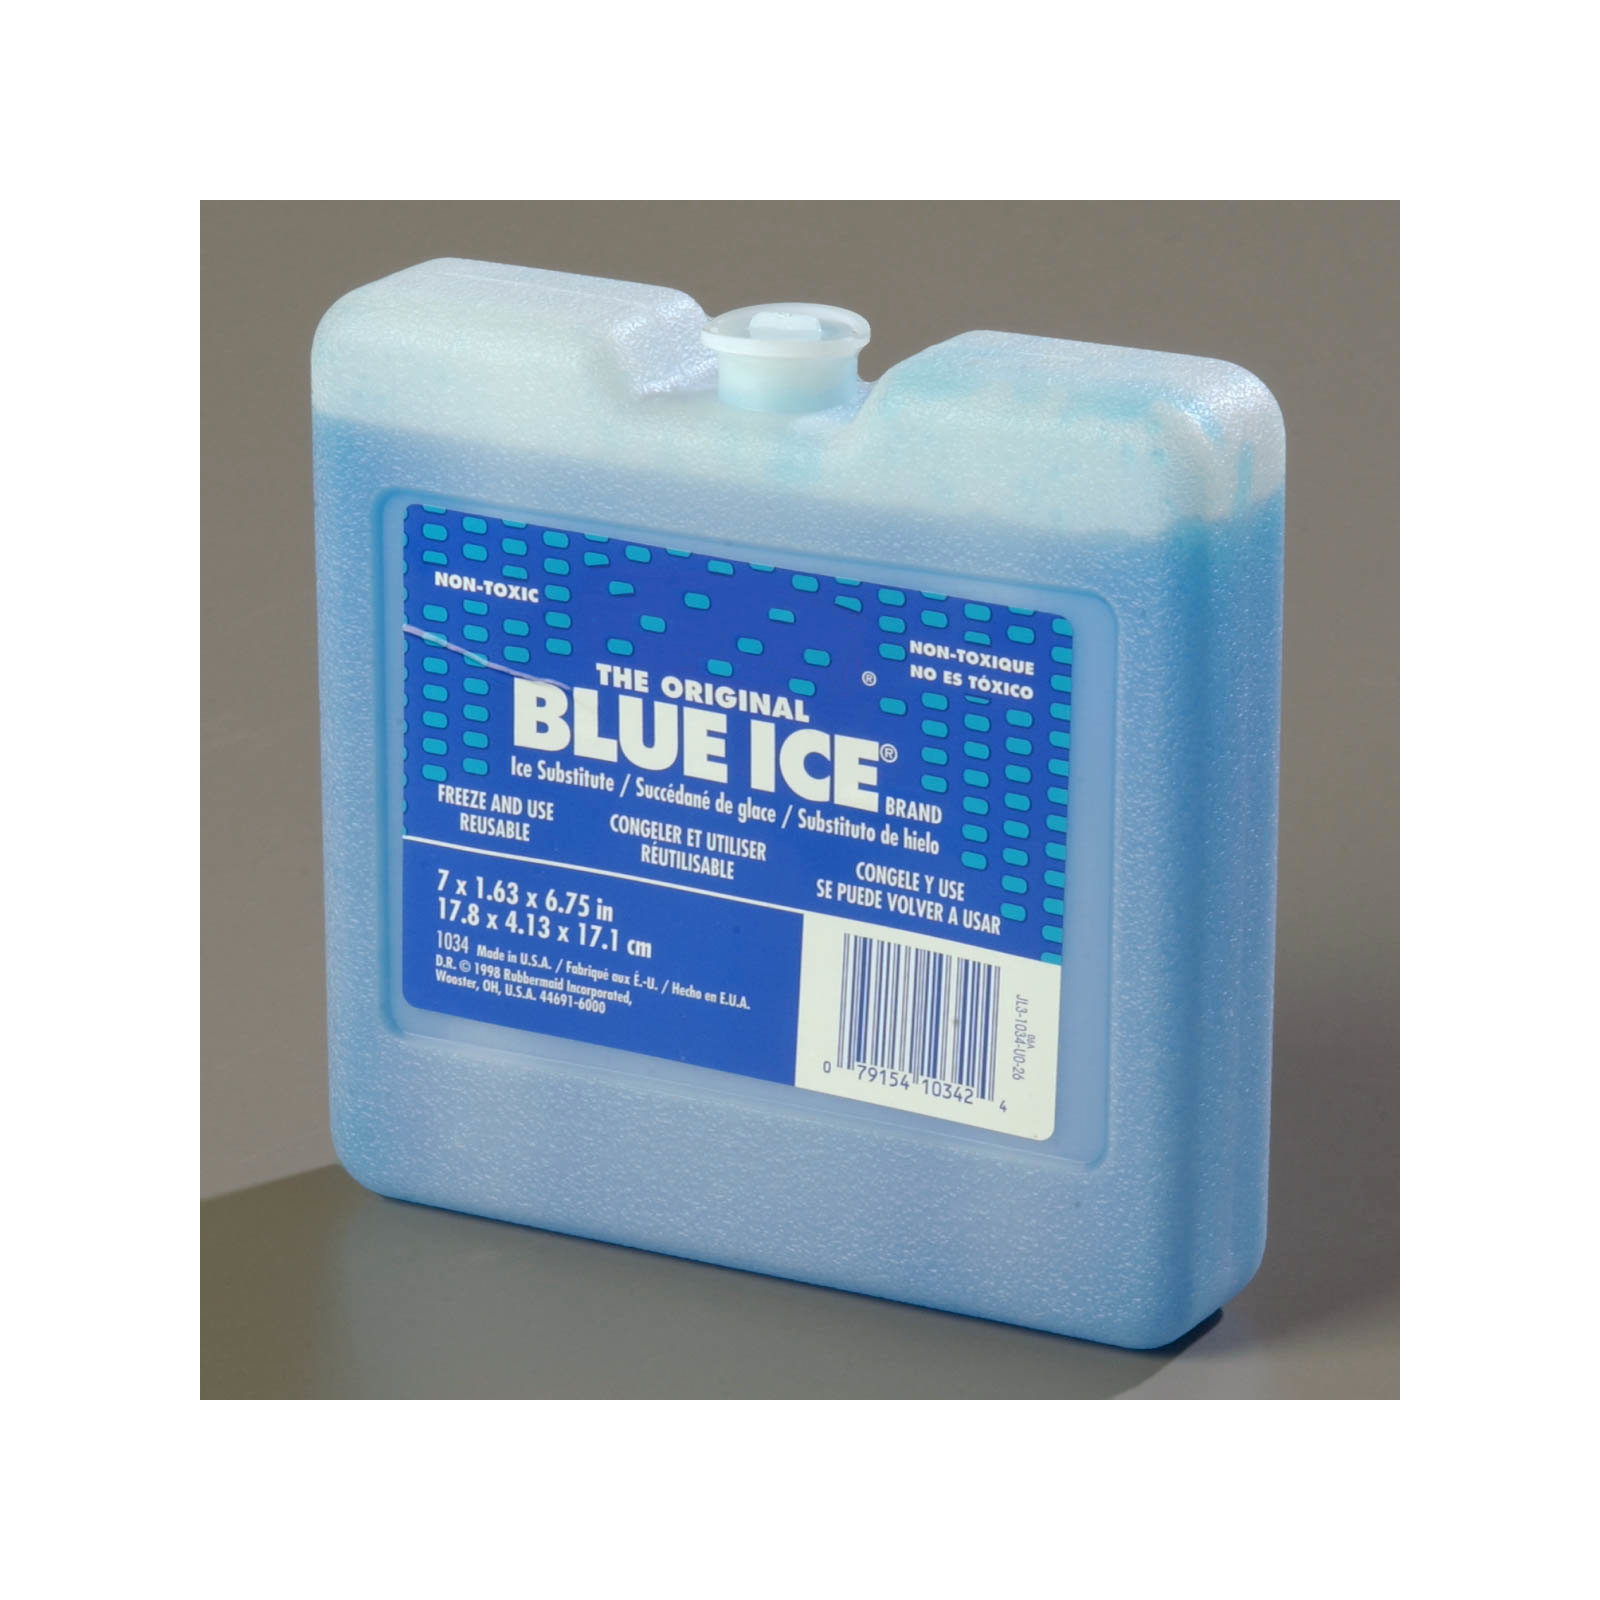 Large Ice Pack